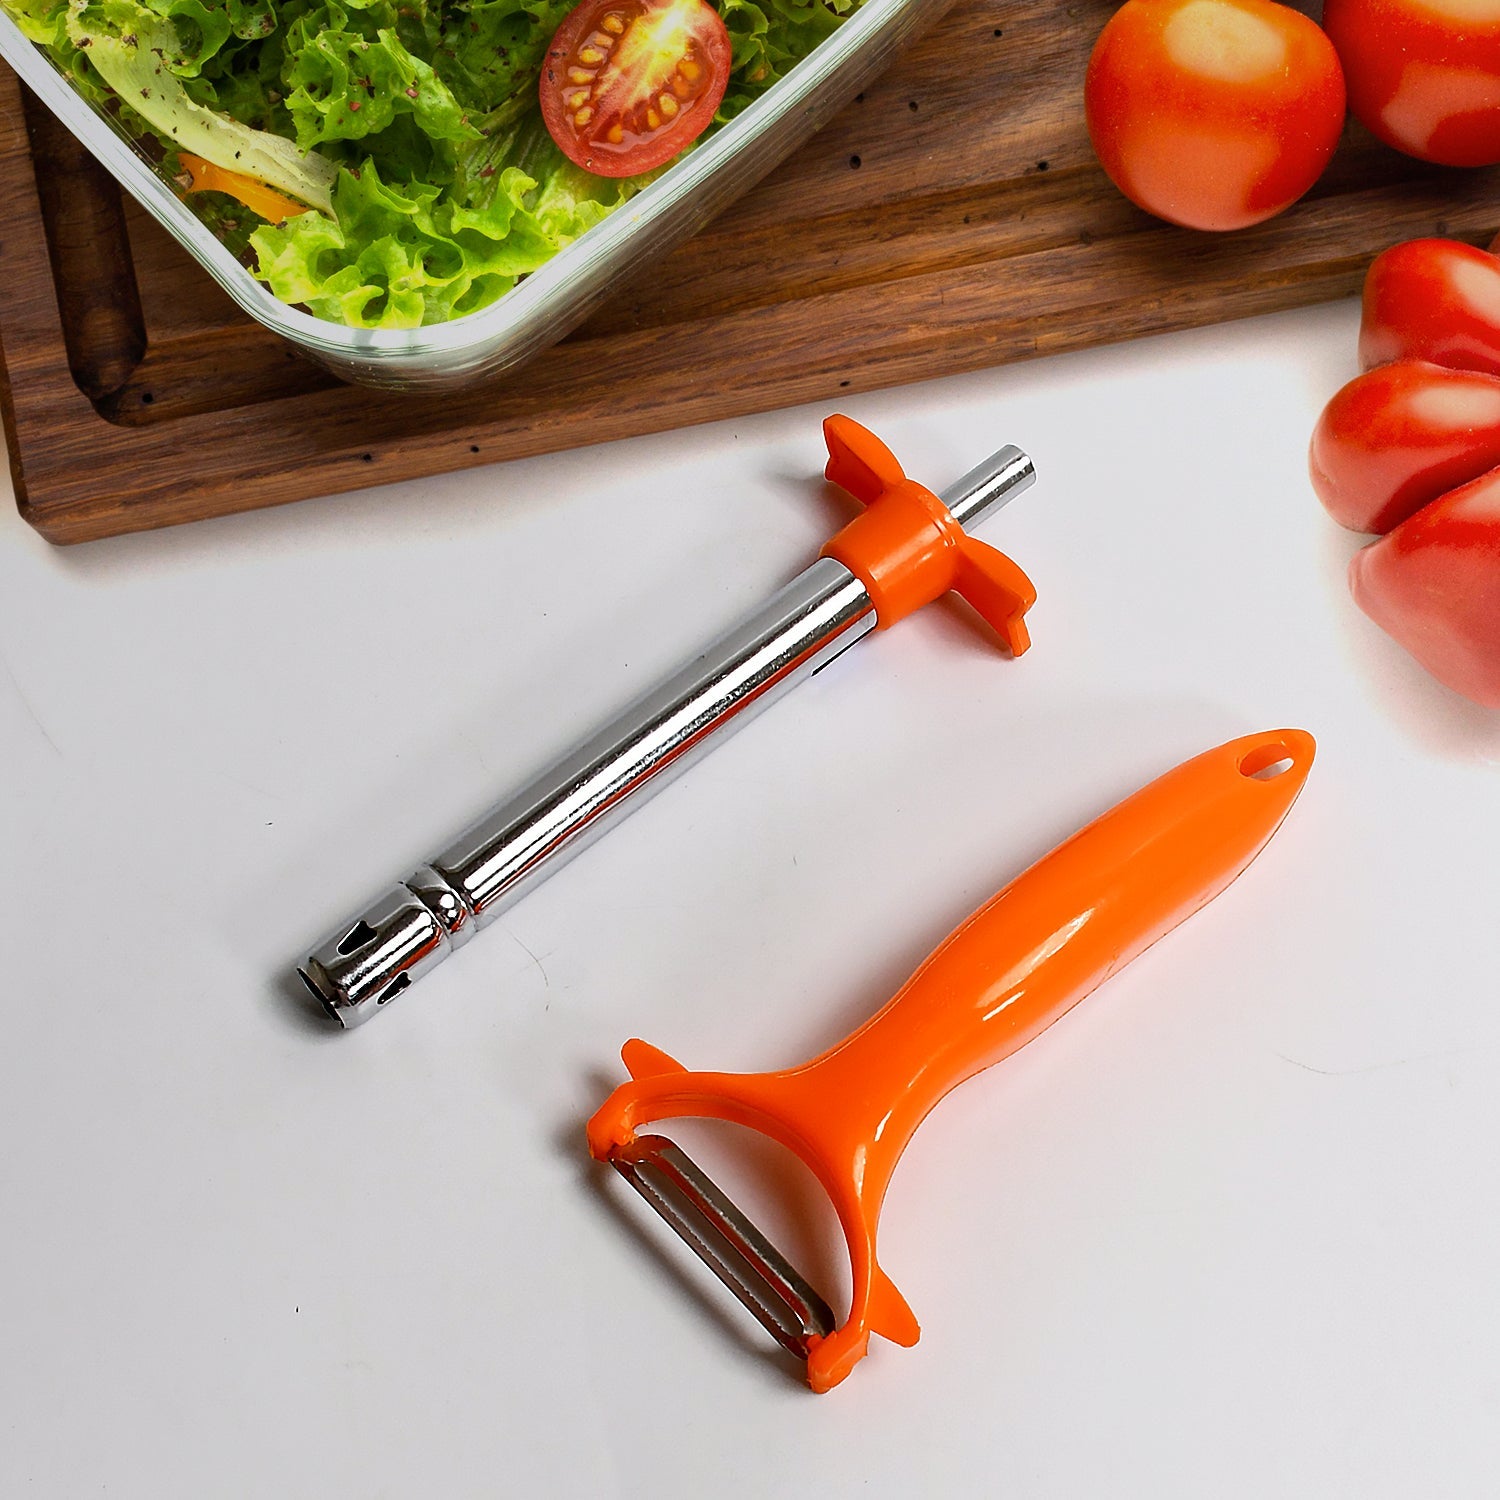 8213 2 in 1 Kitchen Combo Lighter, Stainless Steel Durable Gas Lighter with Vegetable Cutter Peeler, For Kitchen Steel Gas Lighter (2 Pc Set)